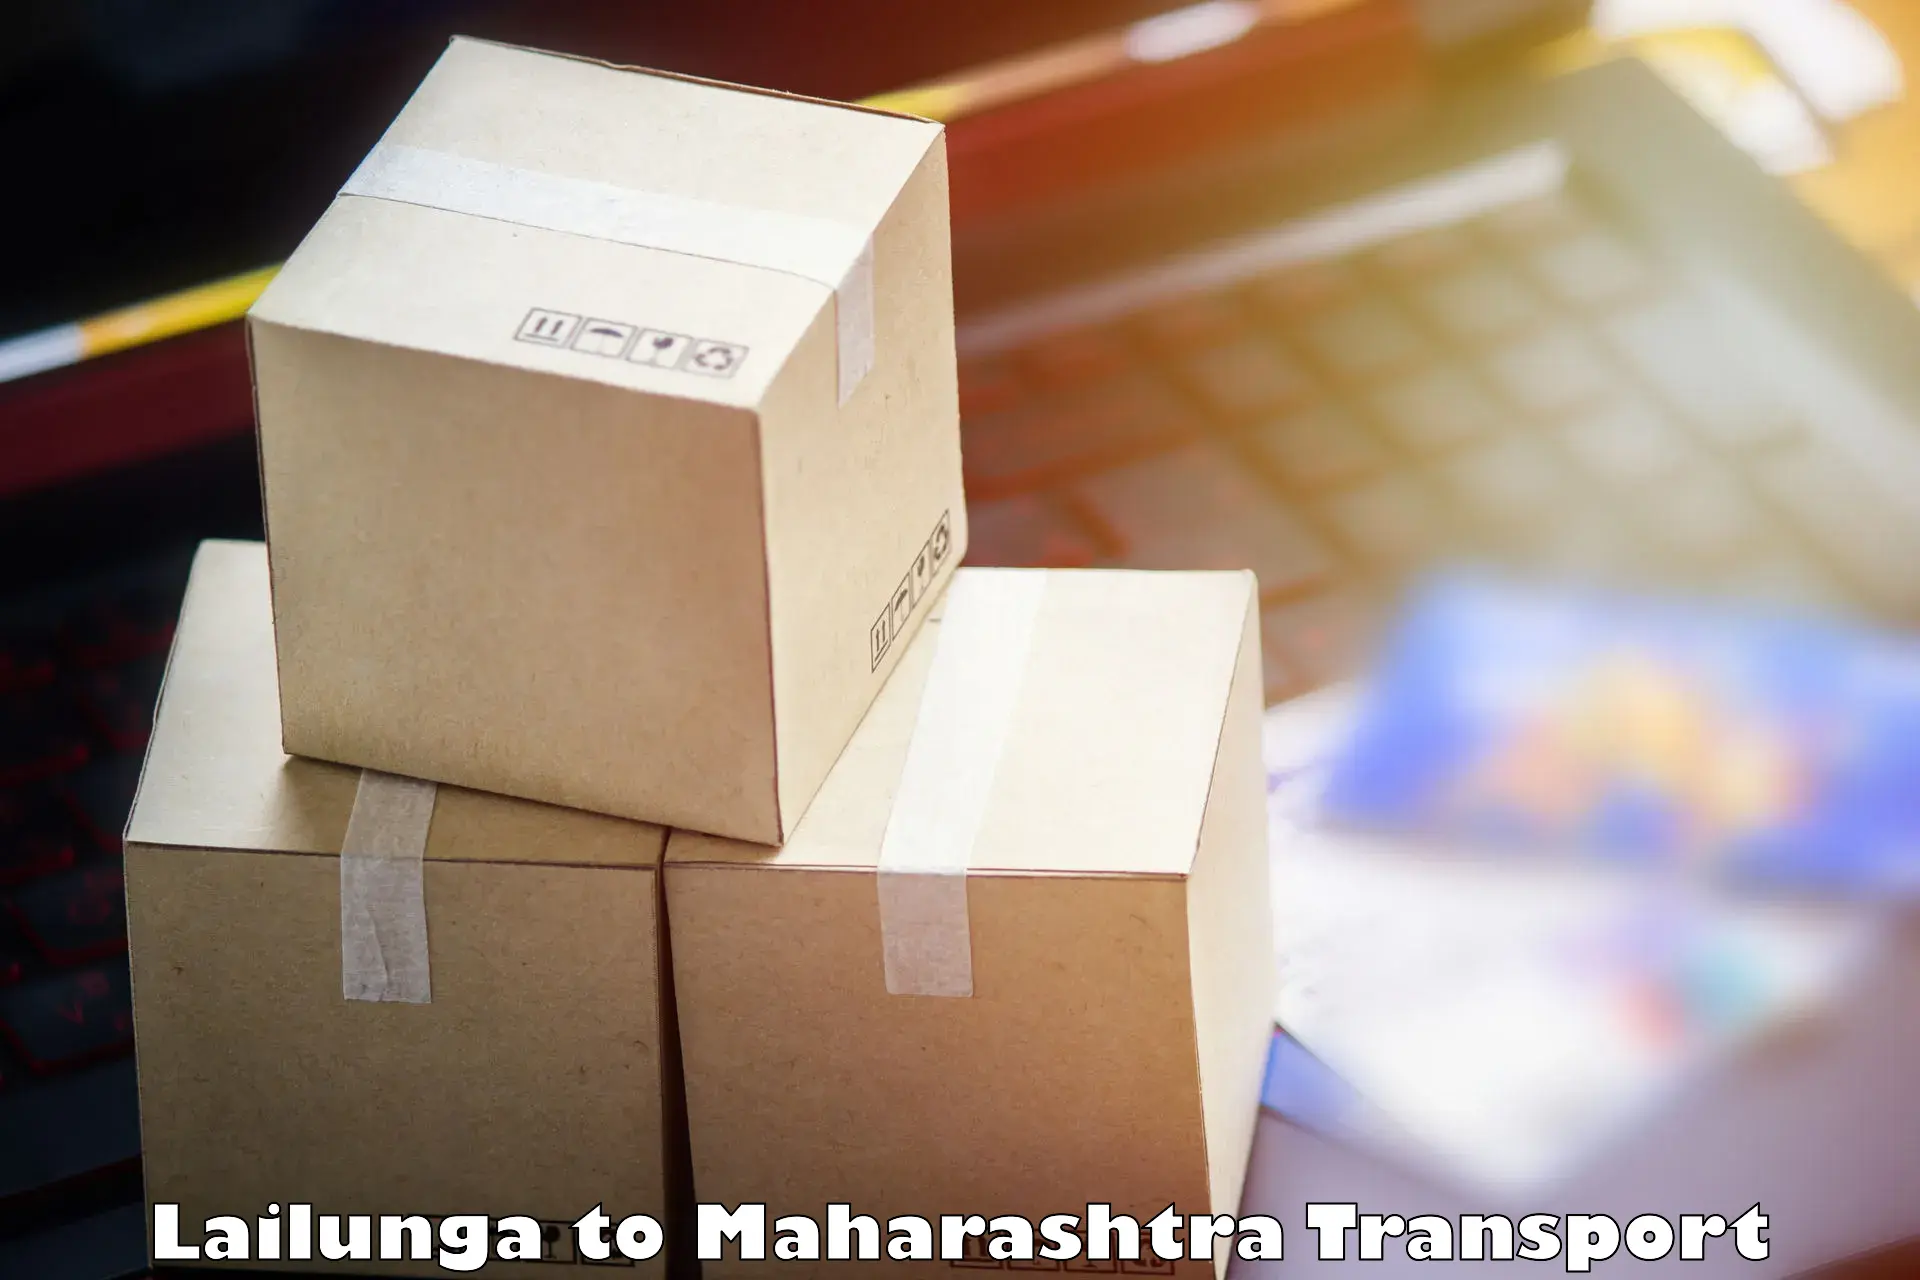 Daily parcel service transport Lailunga to Andheri